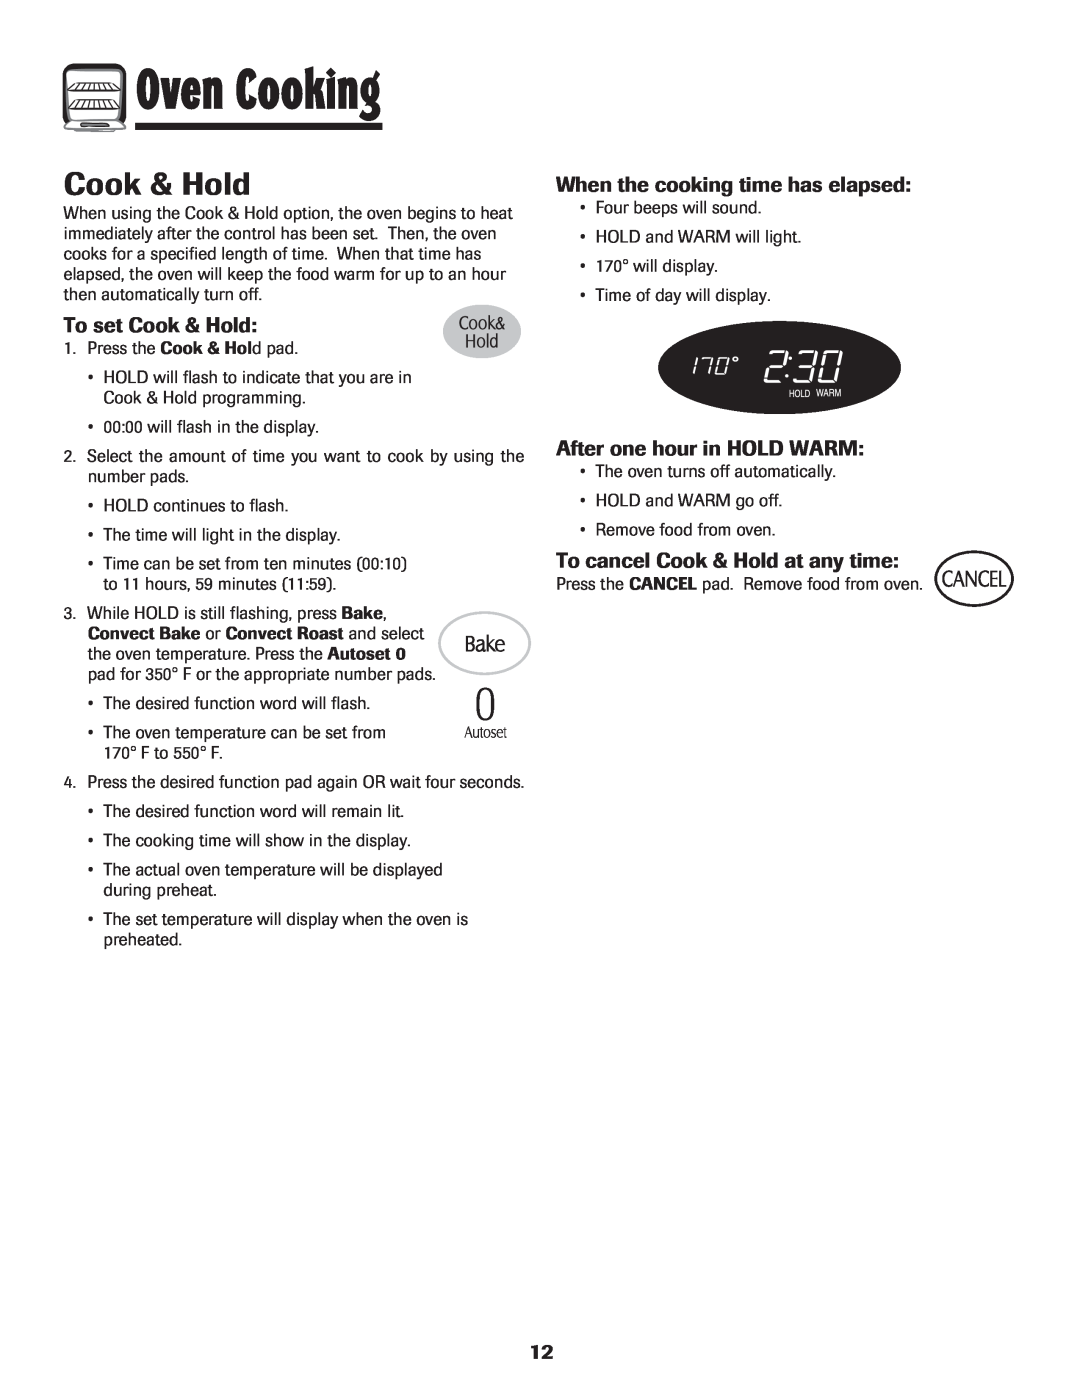 Maytag MER5875RAF To set Cook & Hold, When the cooking time has elapsed, After one hour in HOLD WARM, Oven Cooking 